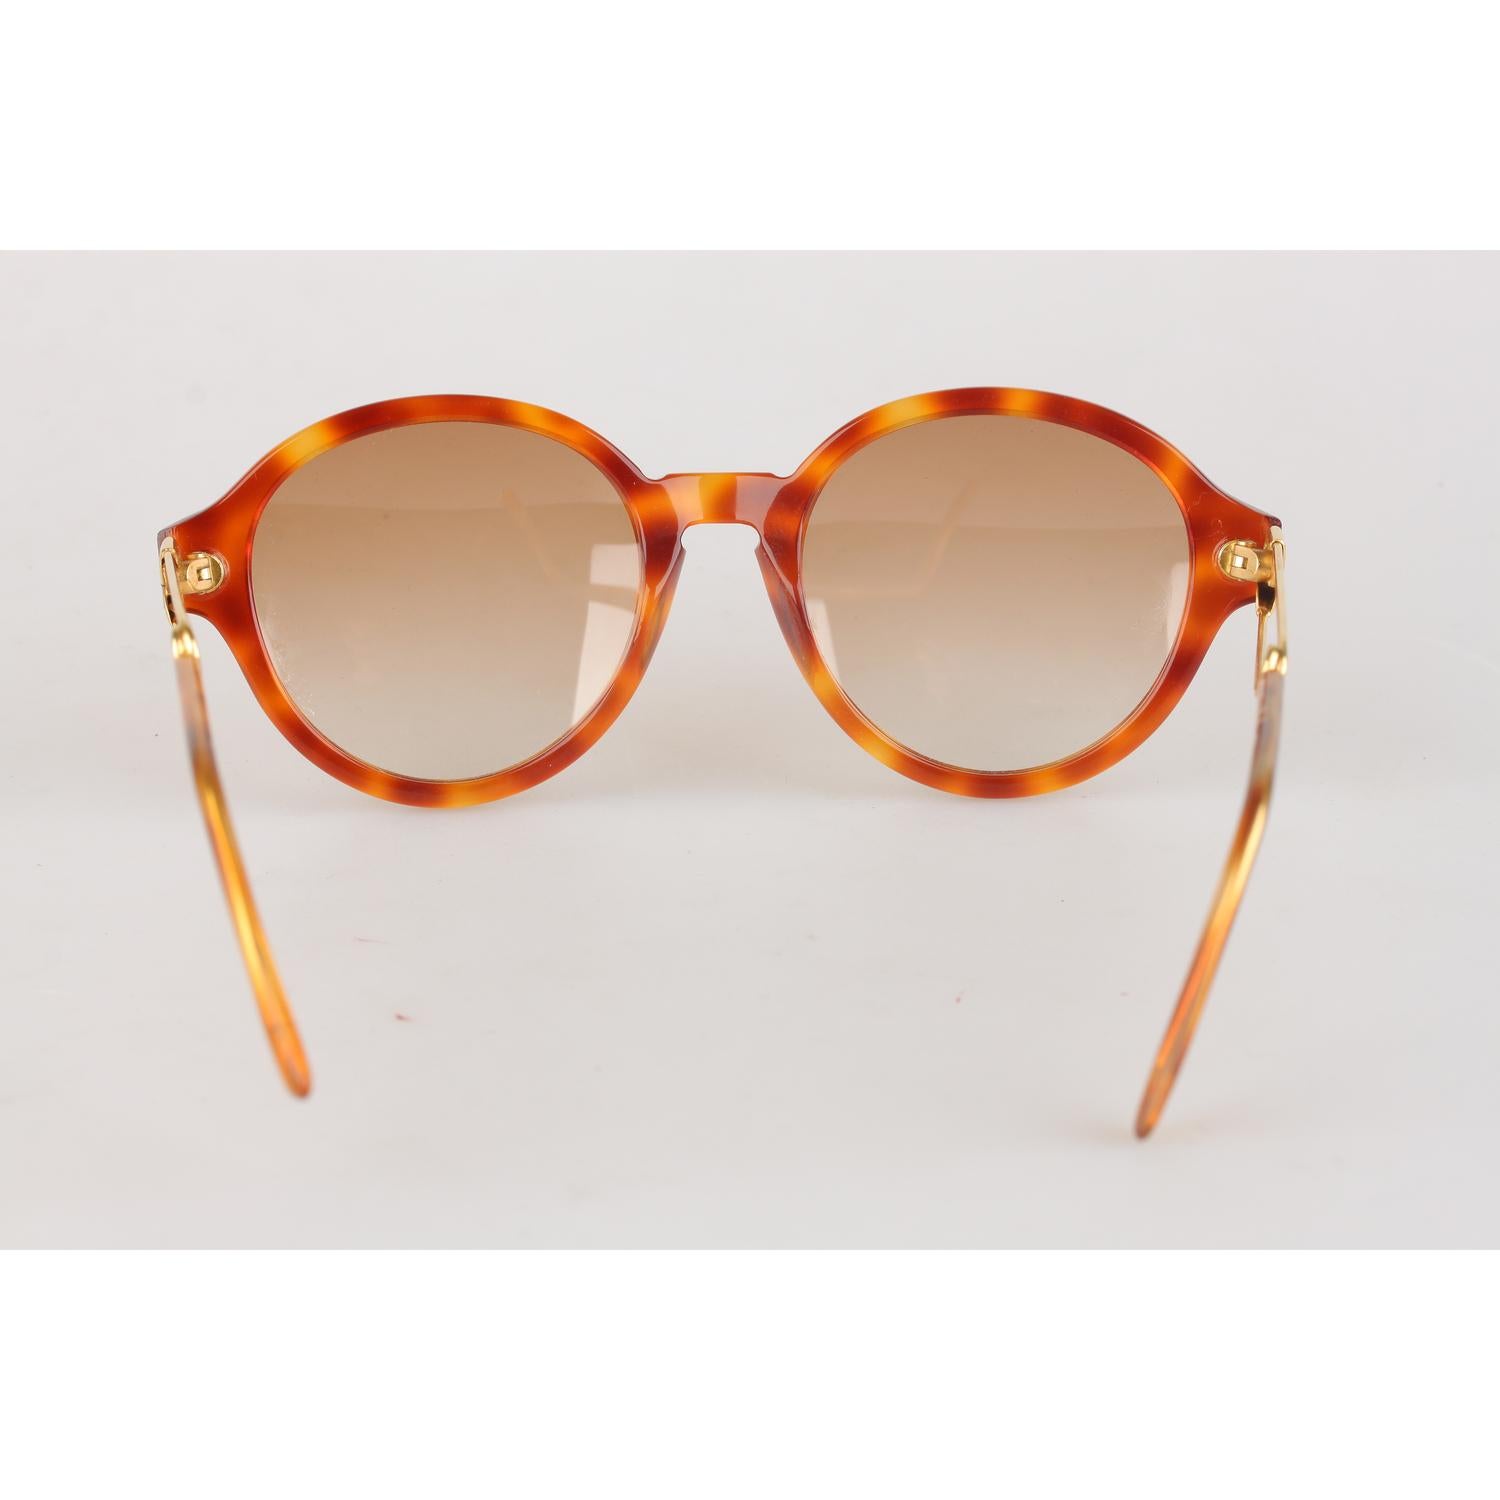 Moschino by Persol Vintage Round Sunglasses Mod M06 53mm New Old Stock In New Condition In Rome, Rome